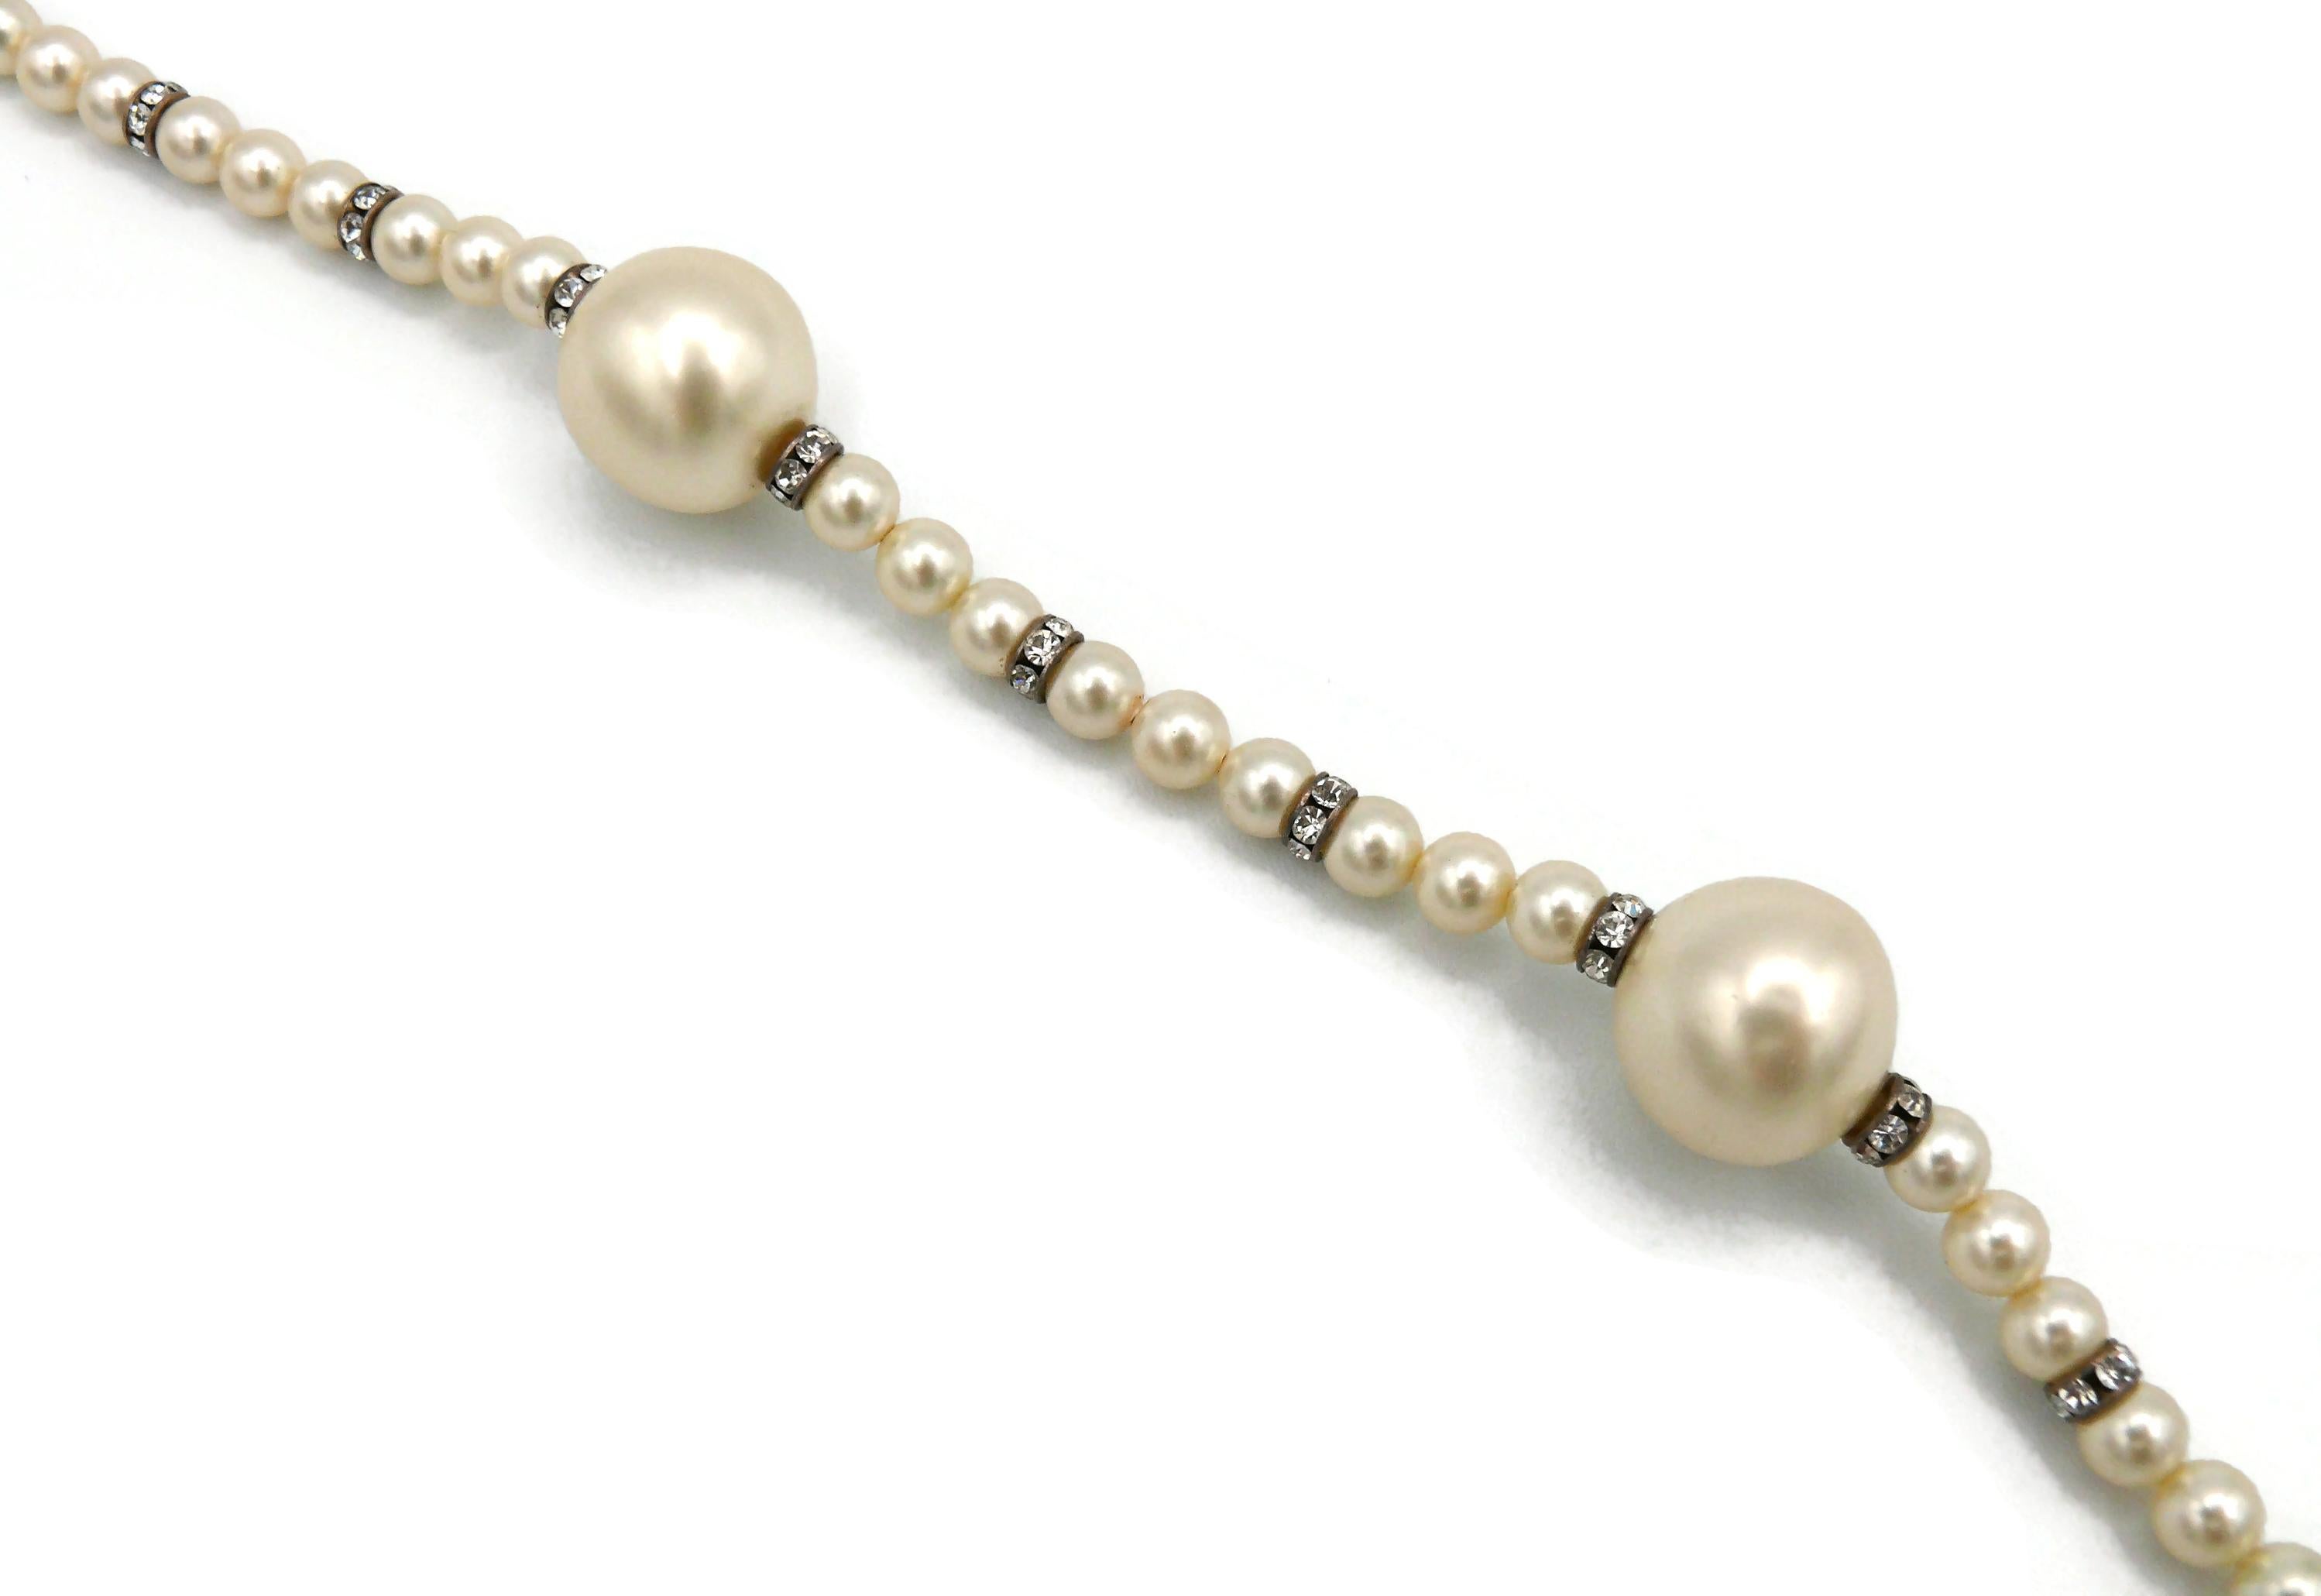 CHANEL by KARL LAGERFELD Vintage Faux Pearl and Crystal Necklace, Fall 1993 For Sale 2